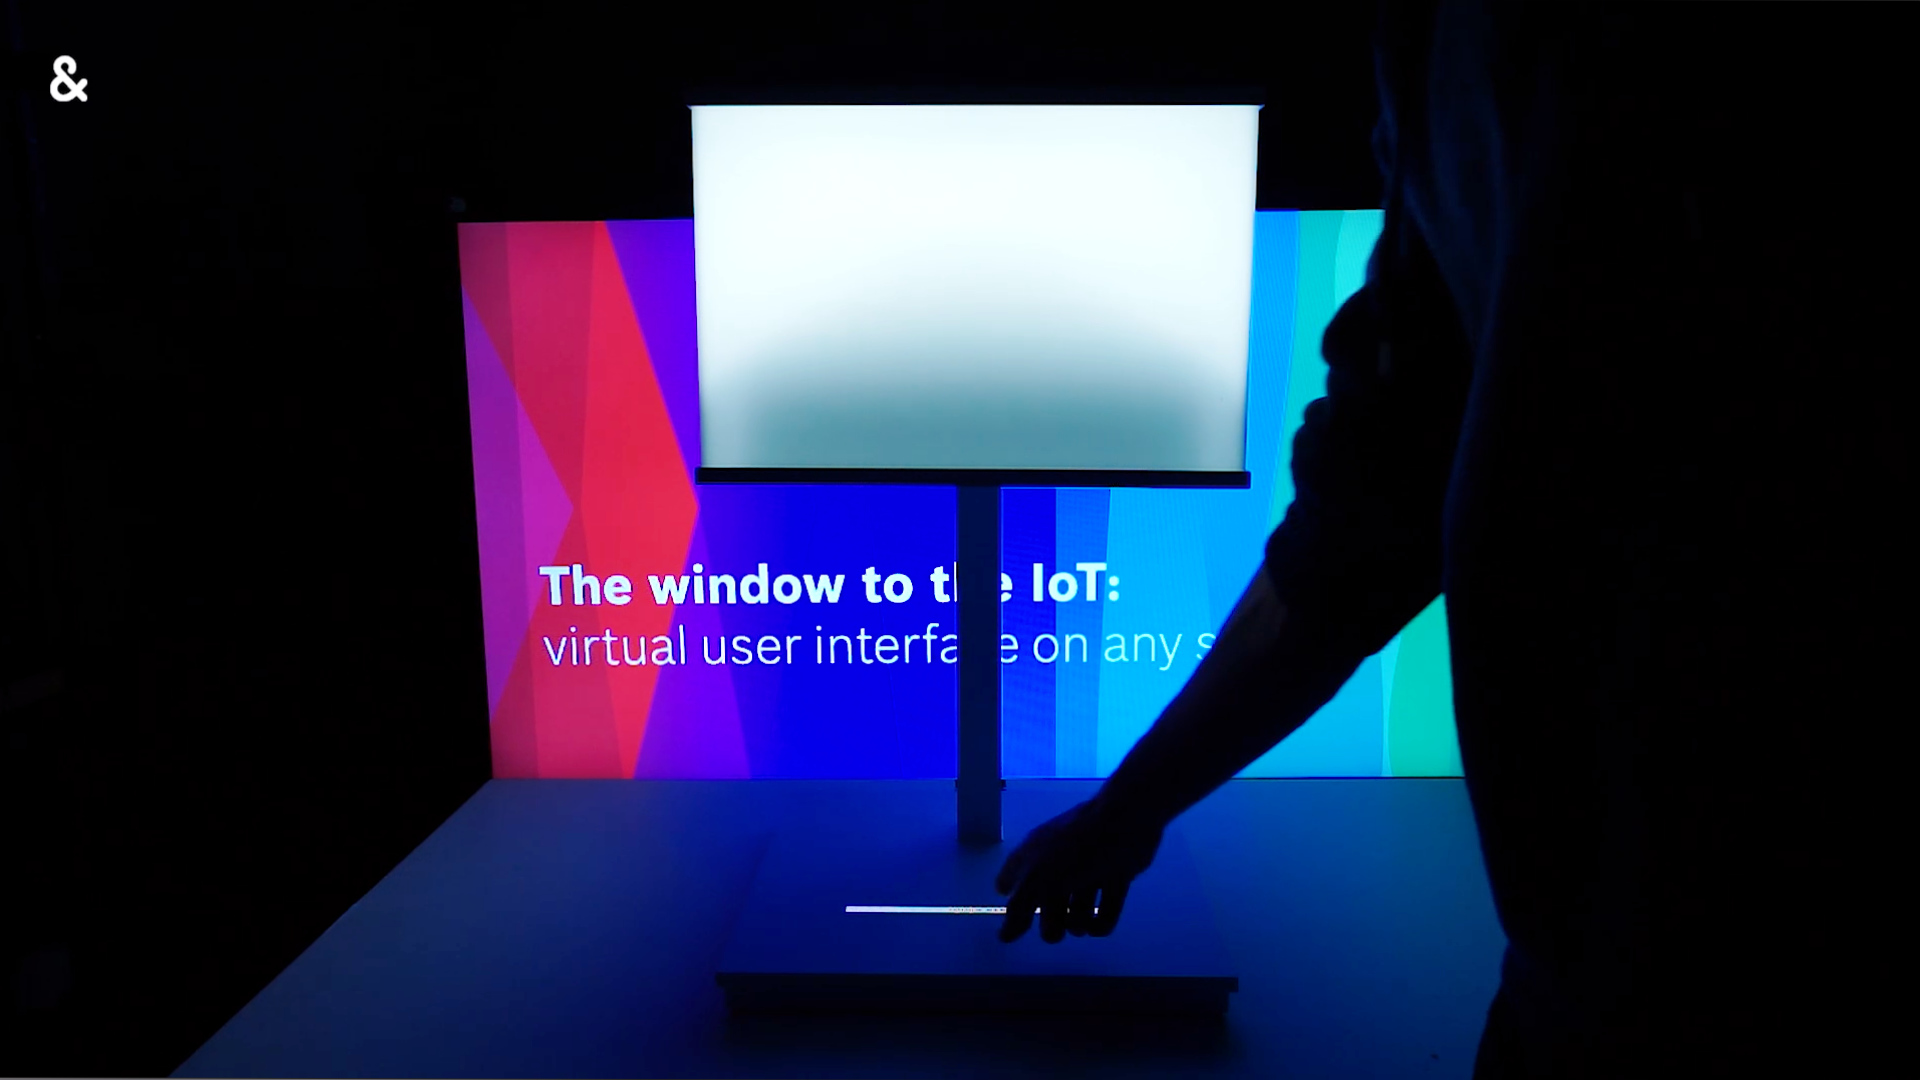 Interactive Laser Projector in Lamp at CES 2018